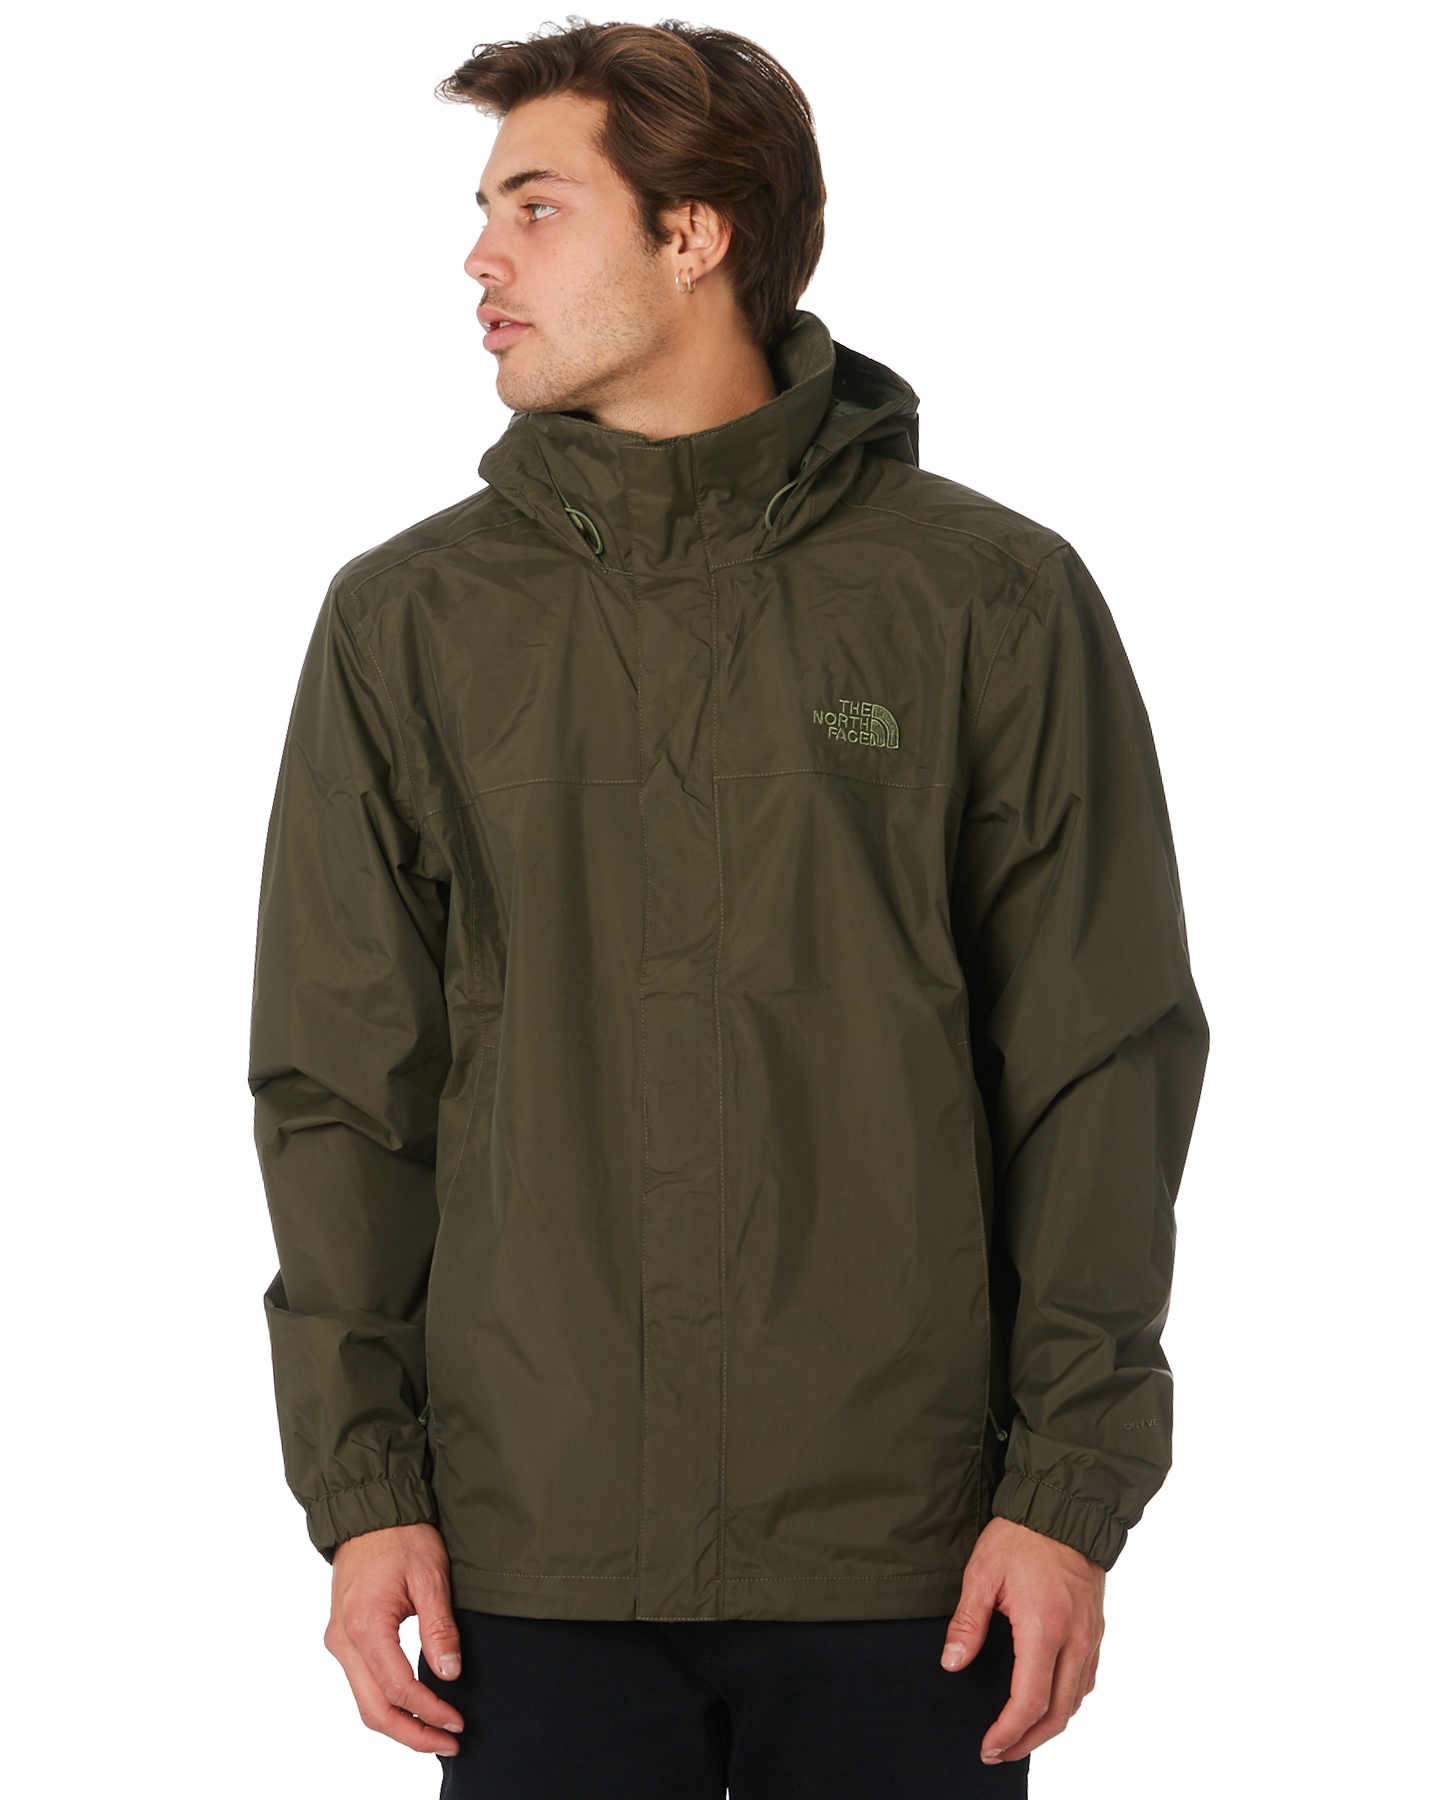 new the north face jacket Online 